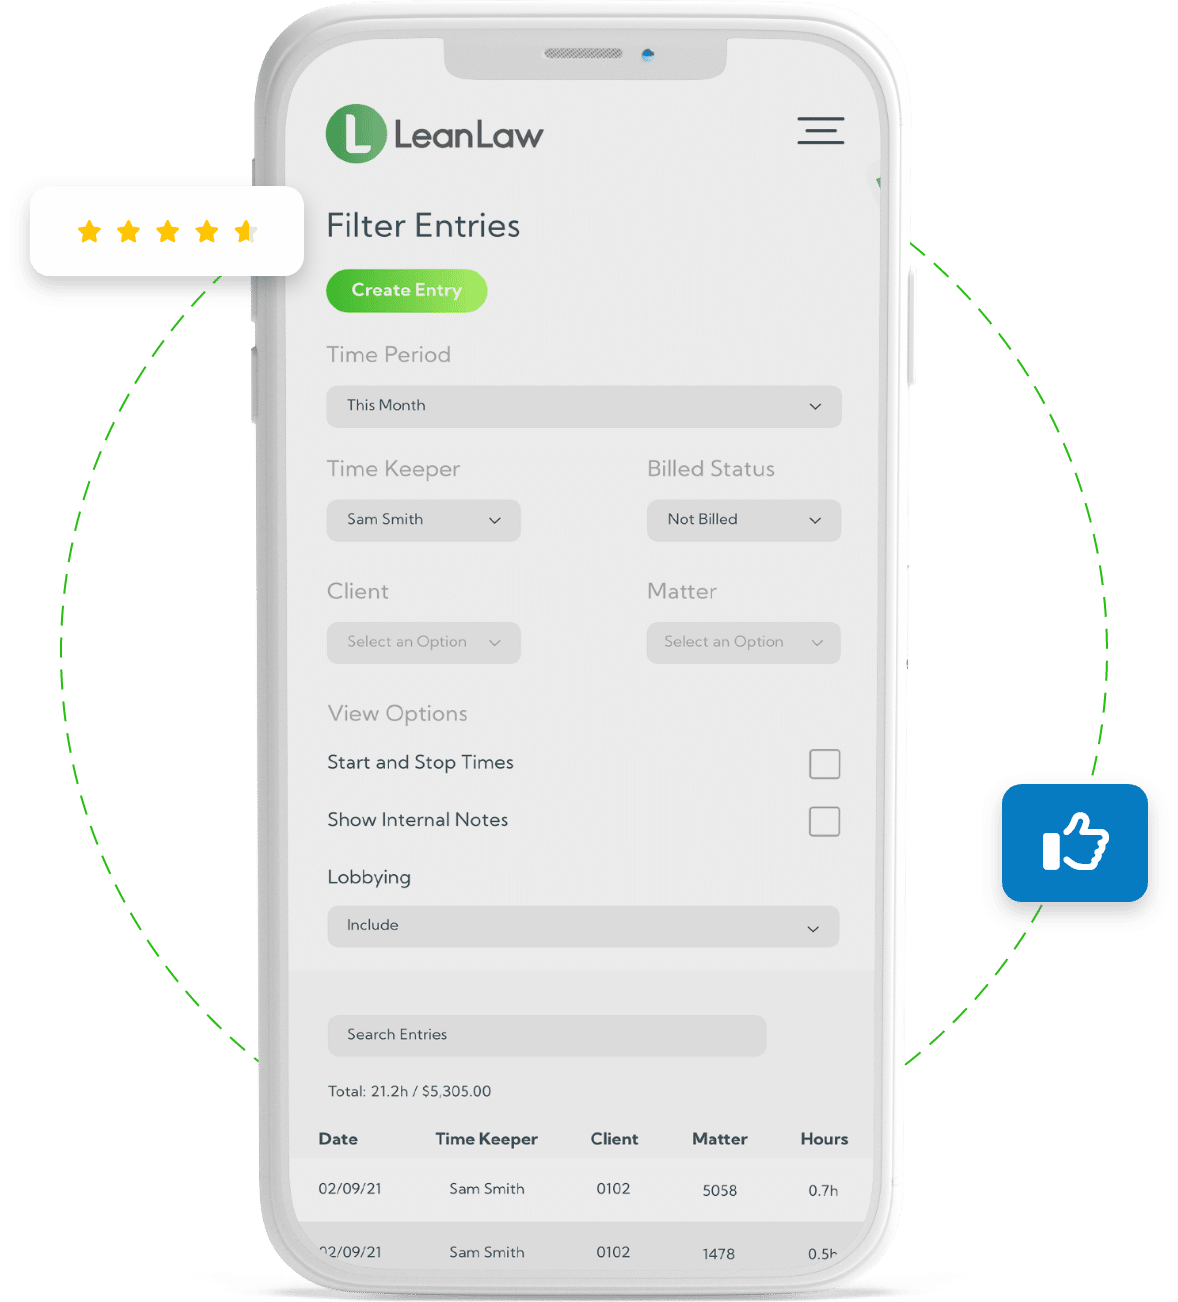 LeanLaw Filter Entries information fields on smartphone screen